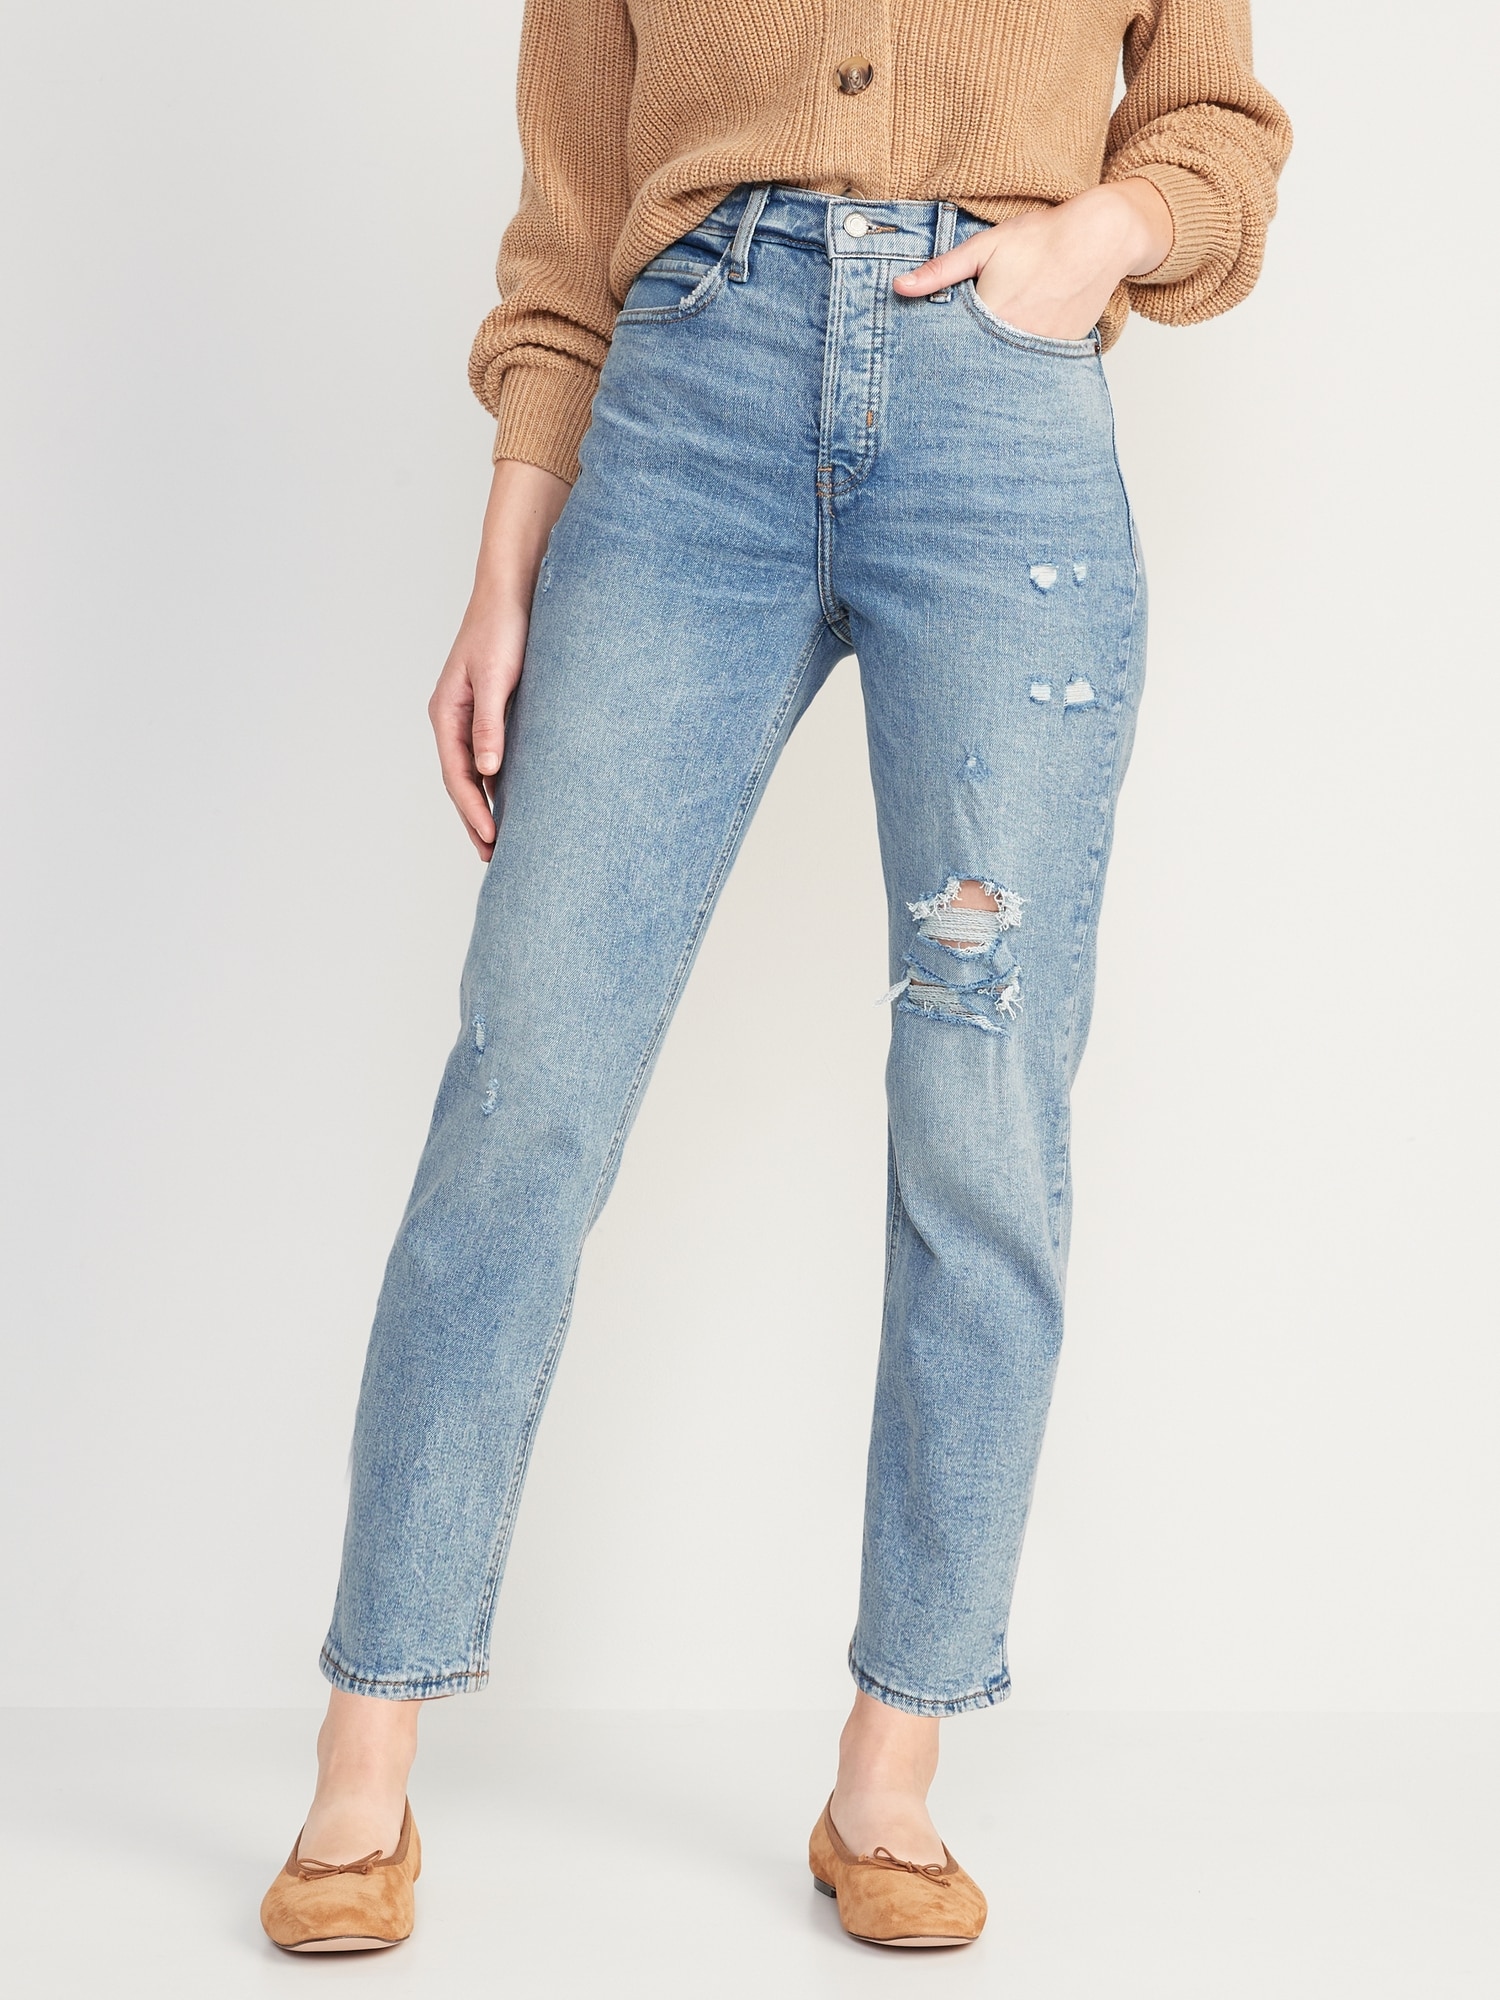 Extra High-Waisted Ripped Wide-Leg Jeans, Old Navy